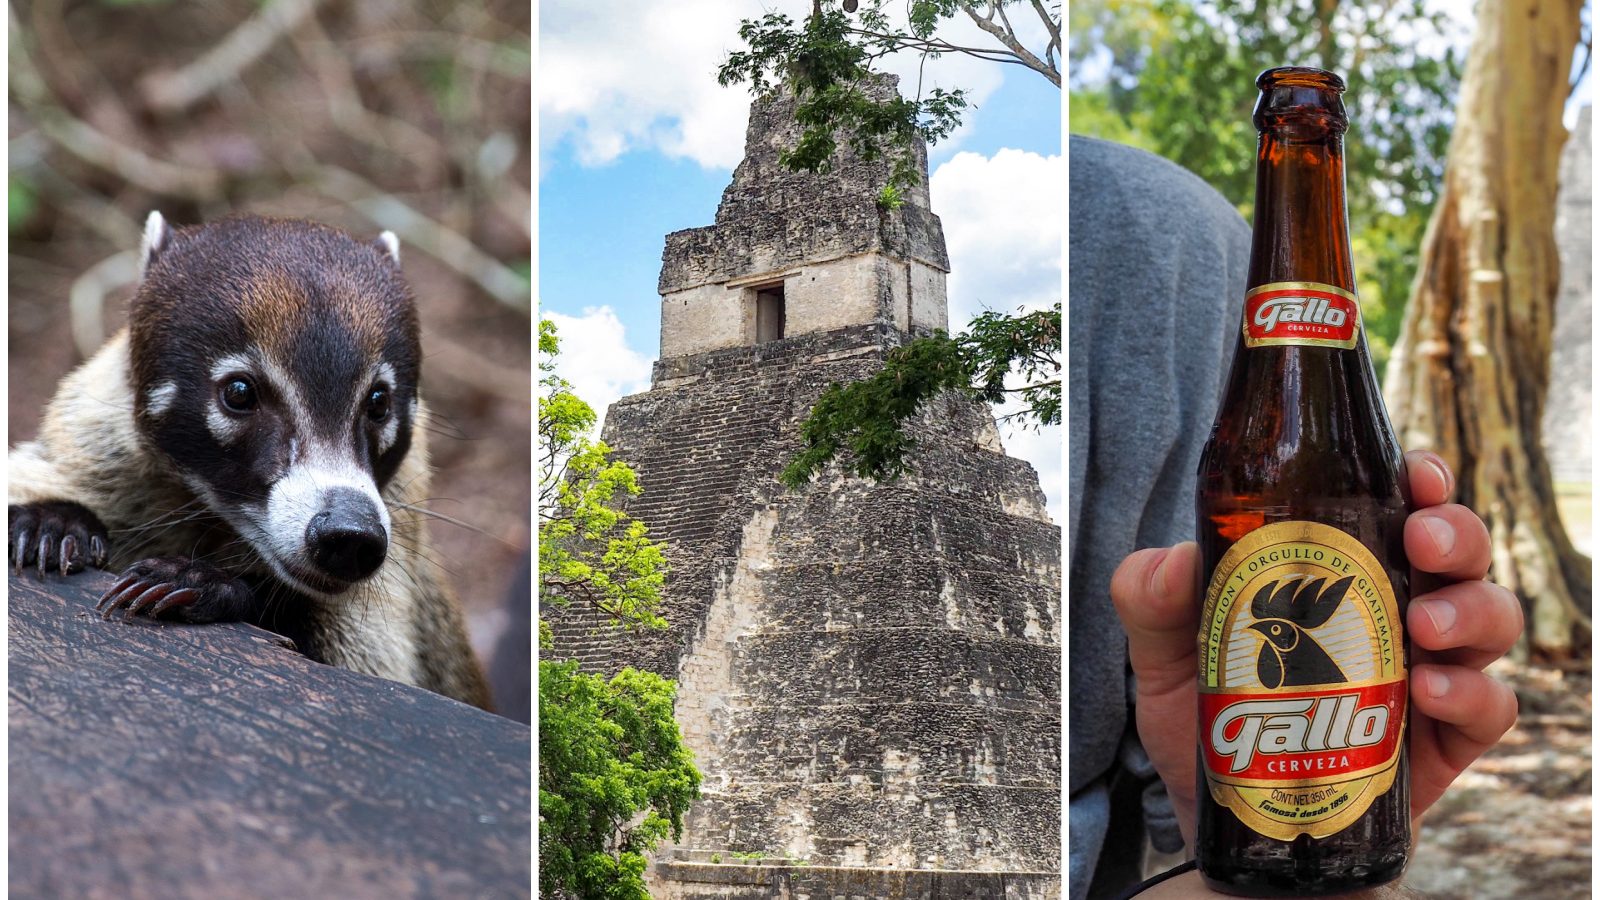 Belize to Tikal Day Trip: Important Tips for Your Guatemala Day Tours | San Ignacio, Belize to Tikal National Park, gallo beer, coatimundis, ancient Maya temples